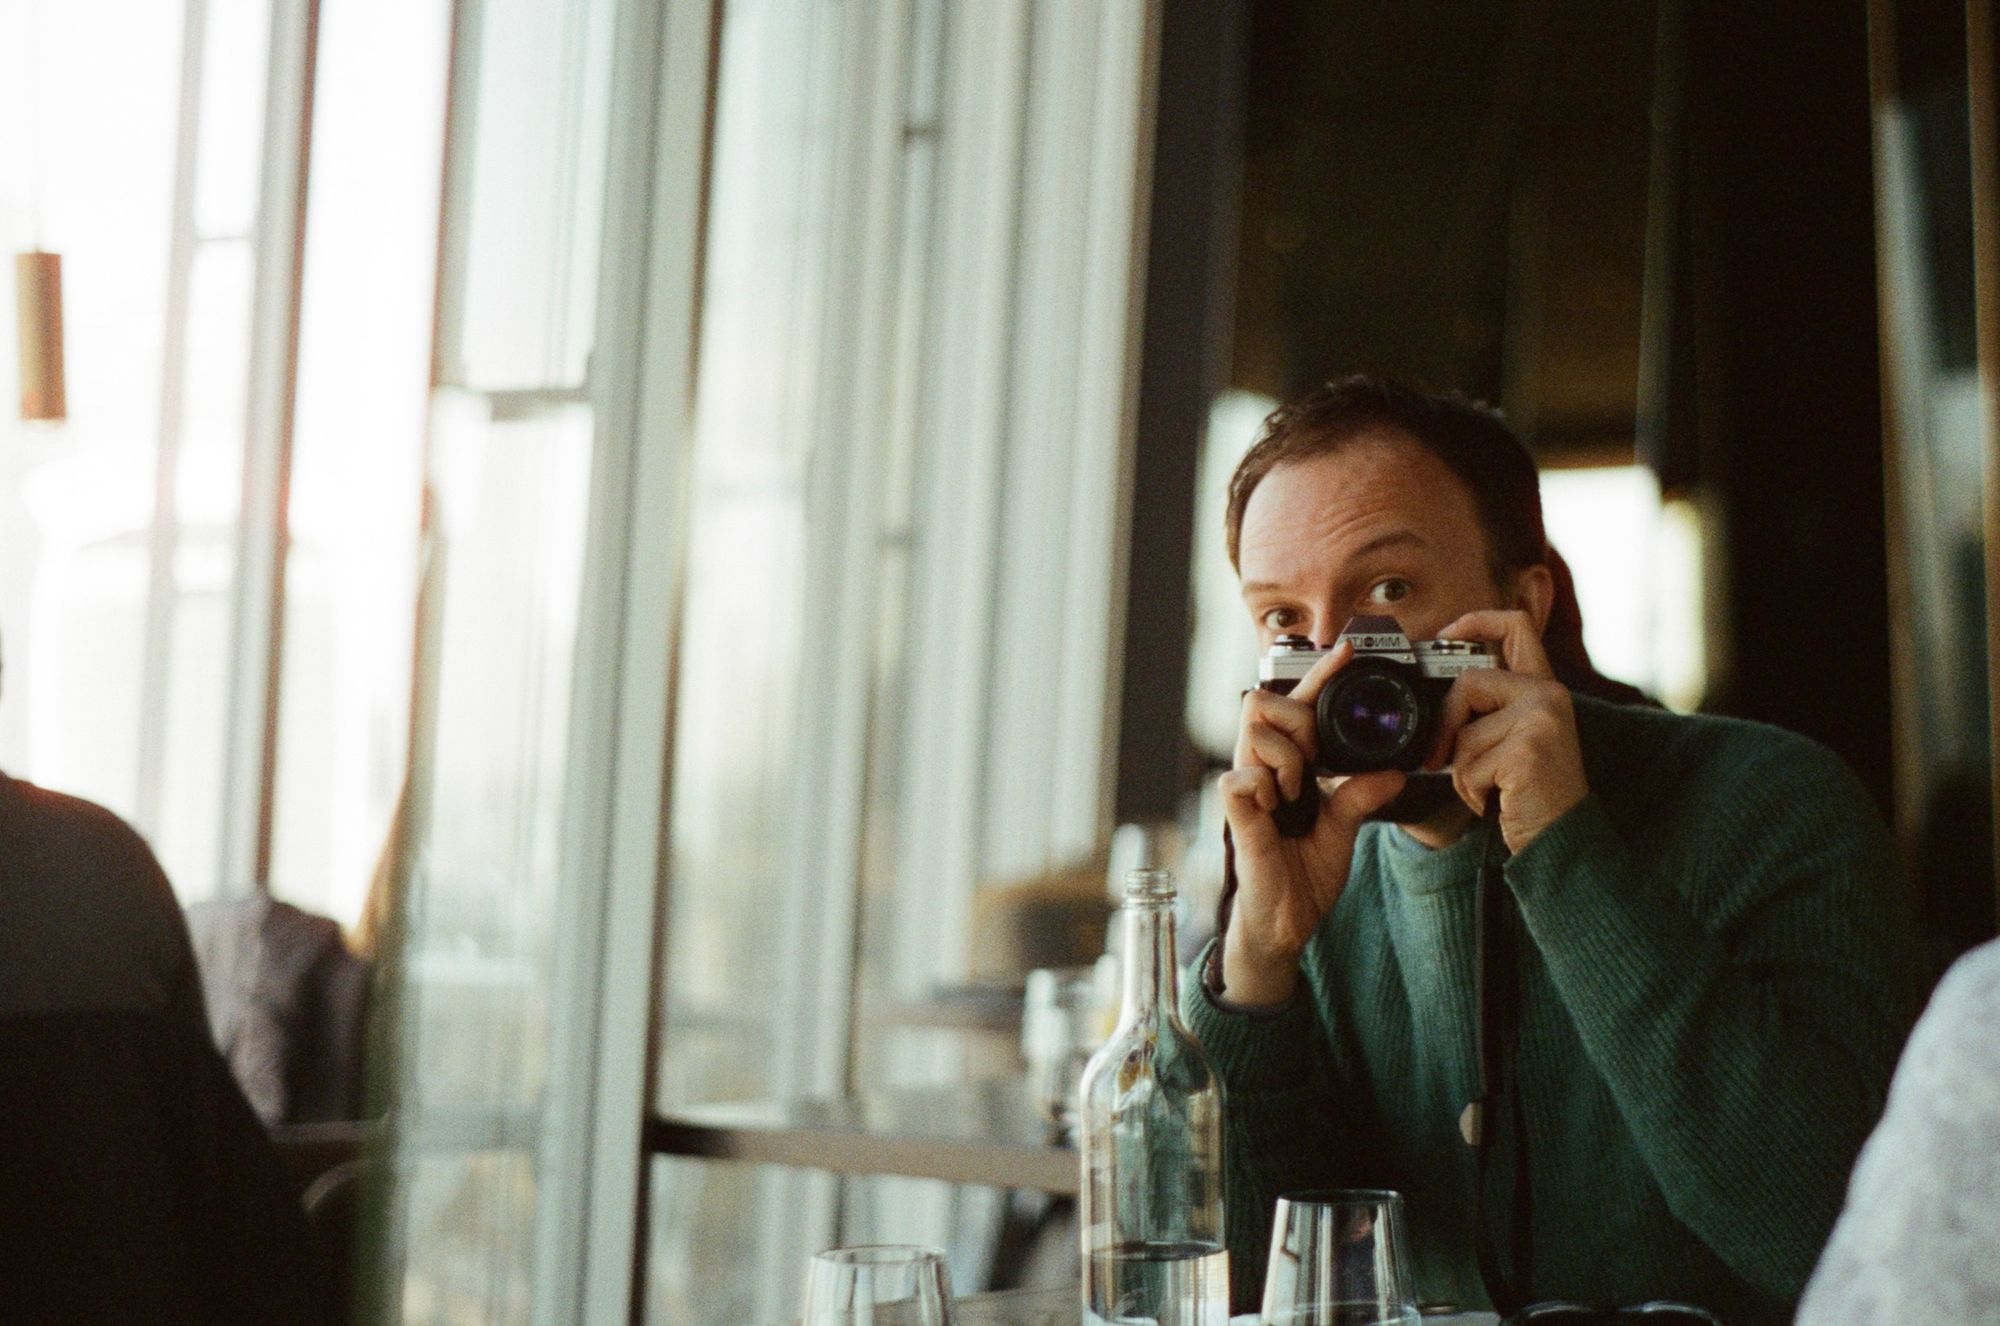 Jonathan sits at a table in a restaurant with floor-to-ceiling windows, photographing himself with an old Minolta SLR camera in a mirror. He's wearing a green jumper.